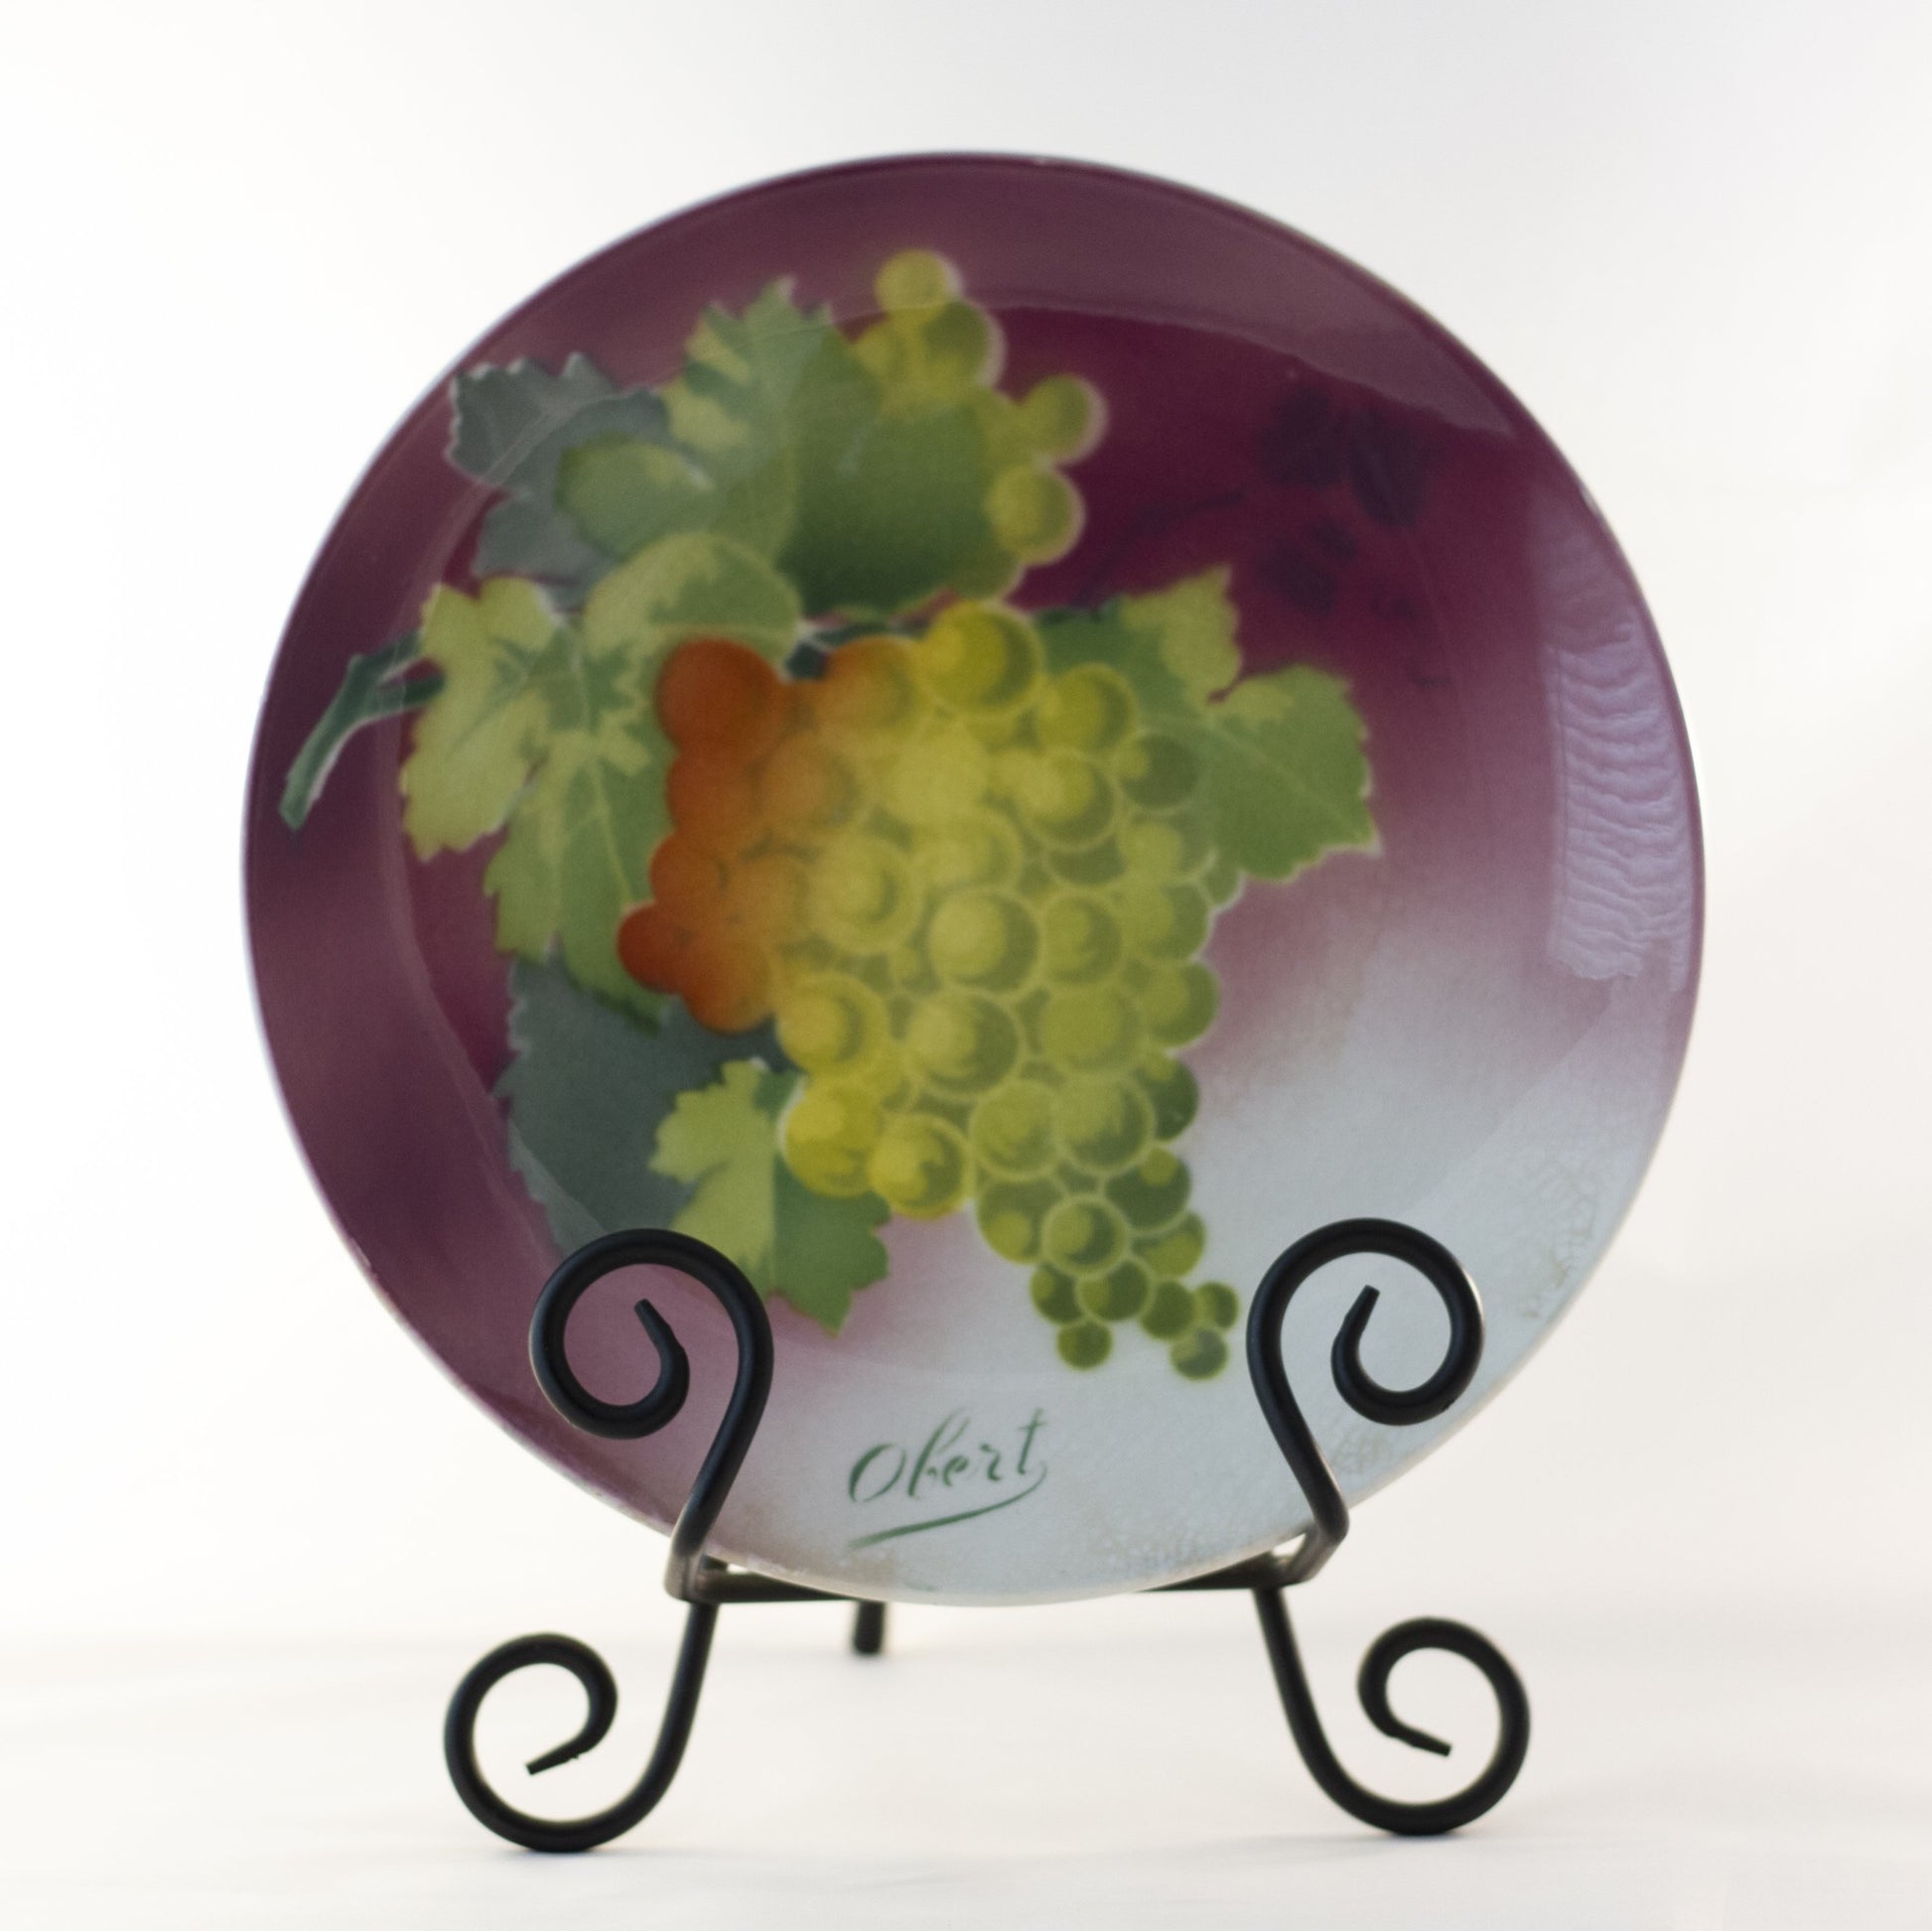 K & G LUNÉVILLE FRENCH FAIENCE PLATE HAND PAINTED GRAPES 8 ½” Signed Obert Circa 1900